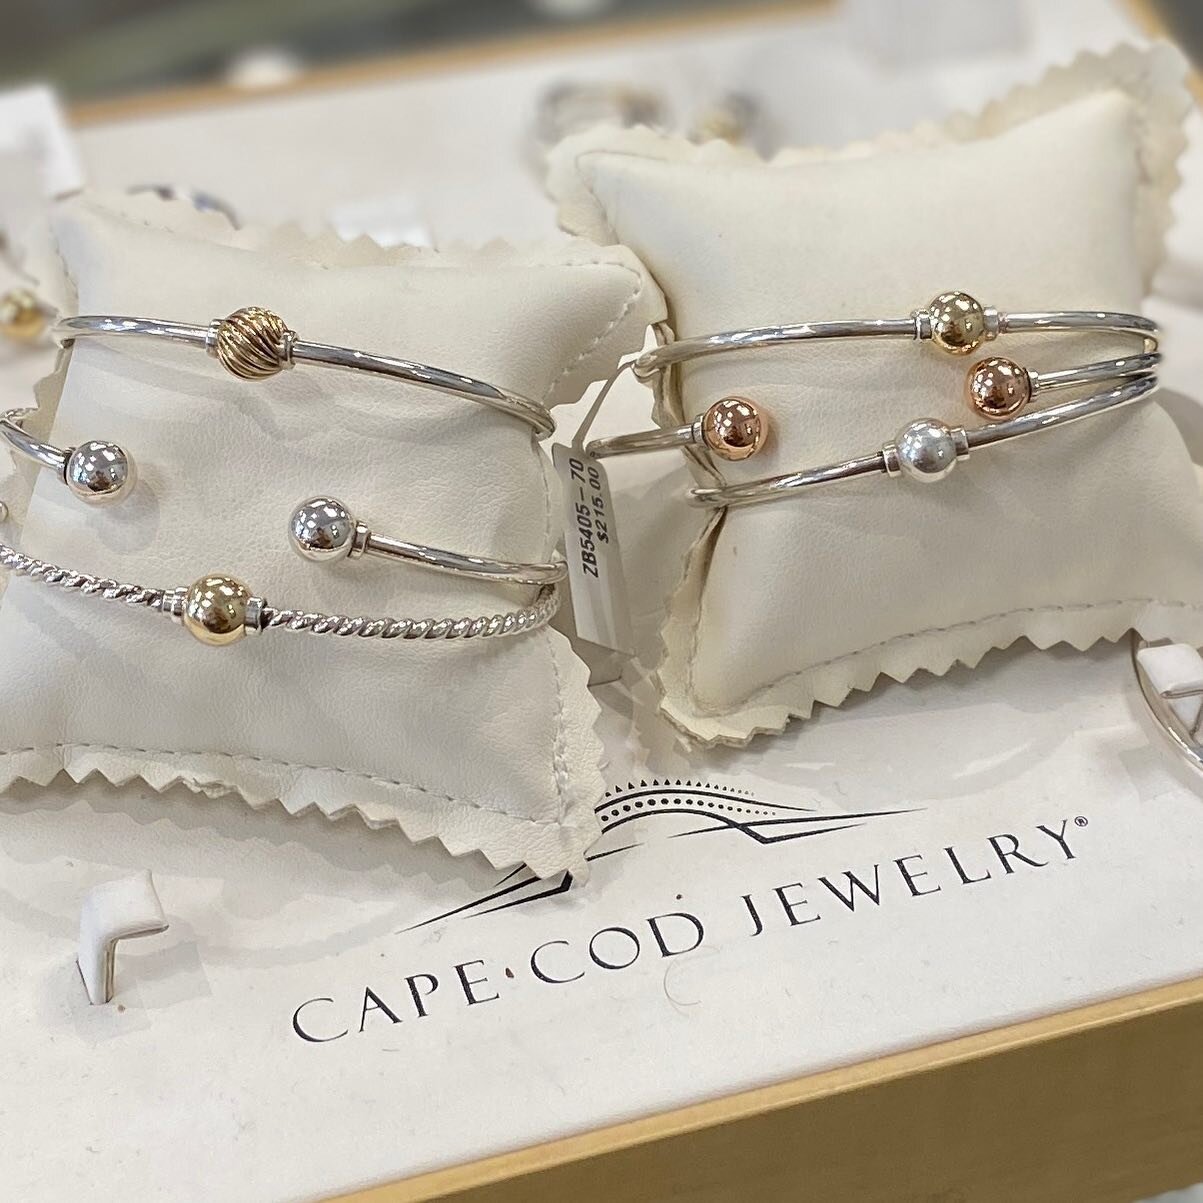 A reminder just in time for the warm weather, we do carry official Cape Cod Jewelry! ☀️🐚